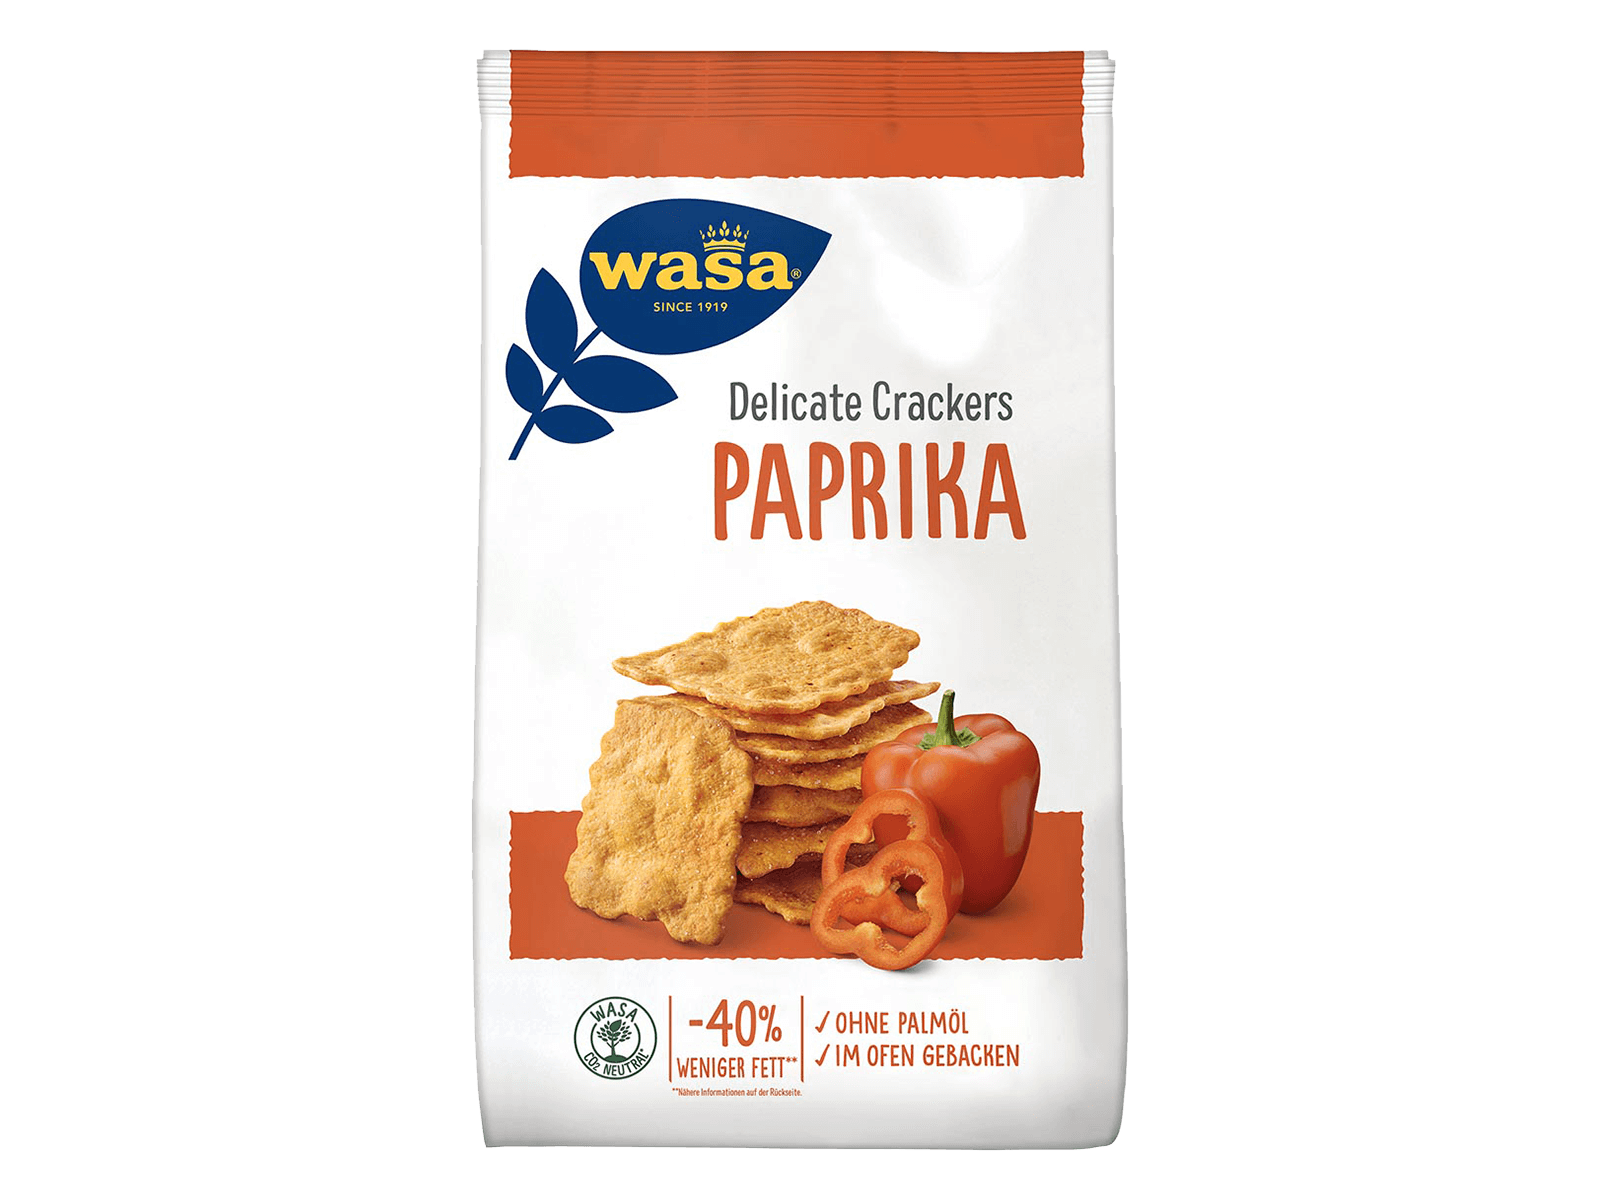 Delicate Crackers Paprika